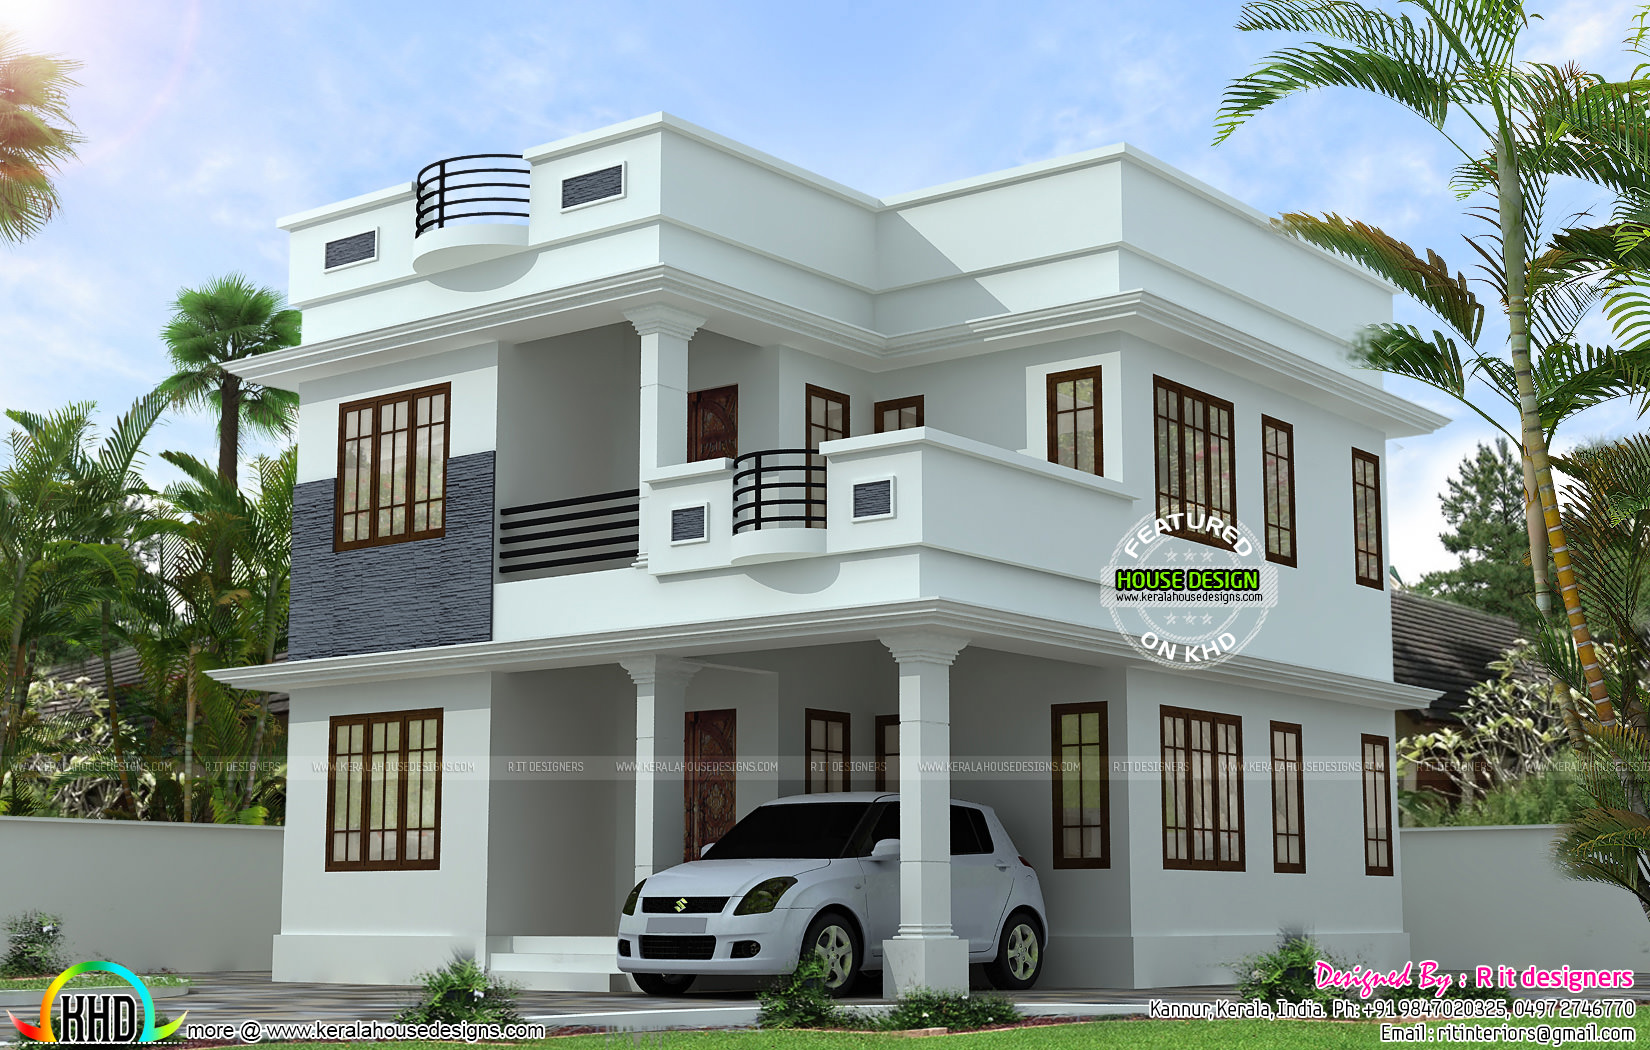 Neat and simple small house plan - Kerala home design and floor ...